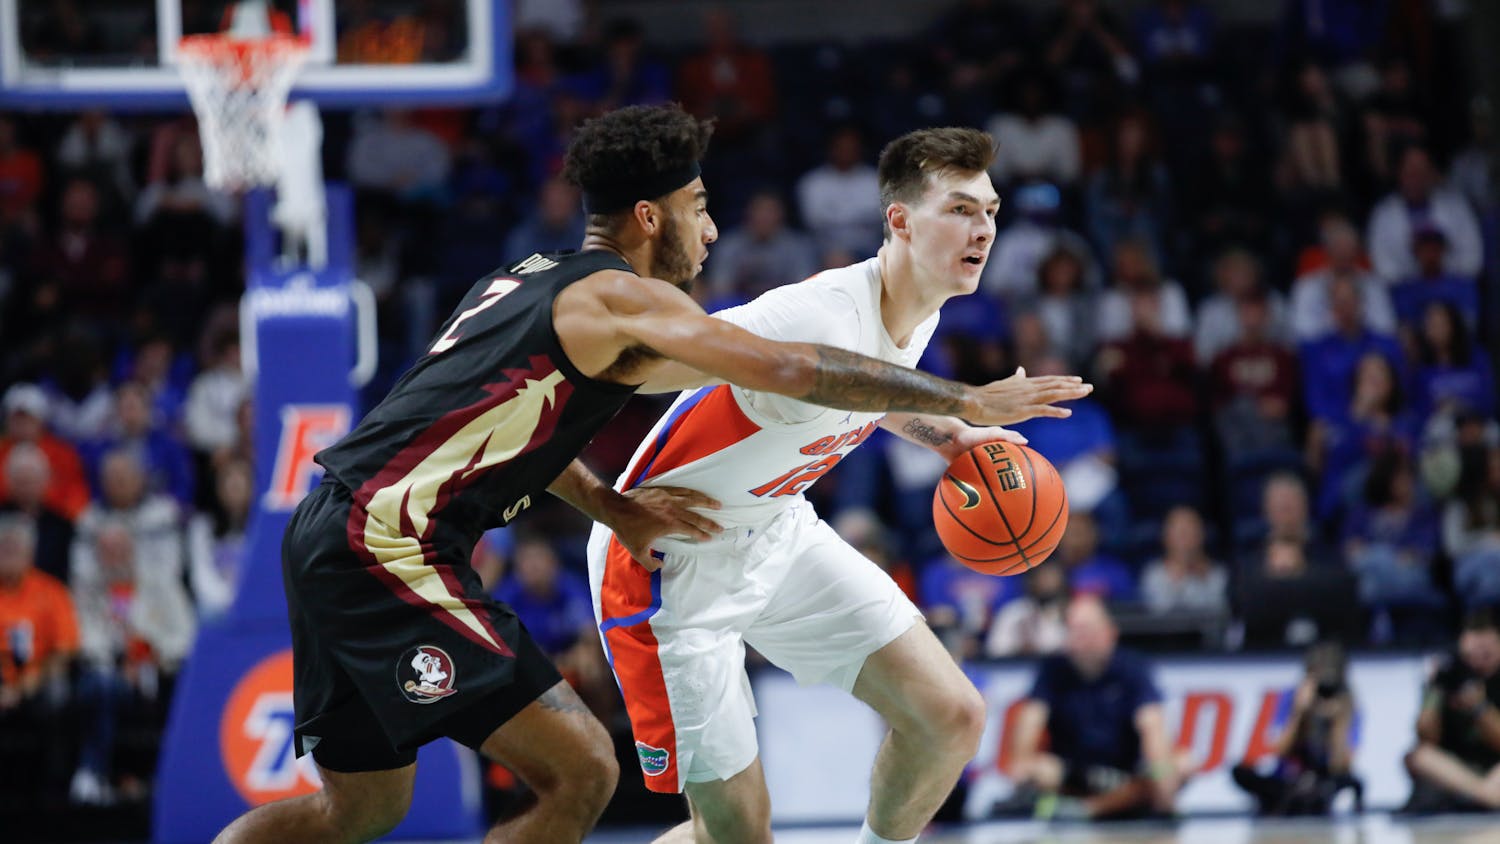 Florida's Colin Castleton dribbles the ball and fends off a Florida State defender during the Gators win over the Seminoles on Nov. 14.